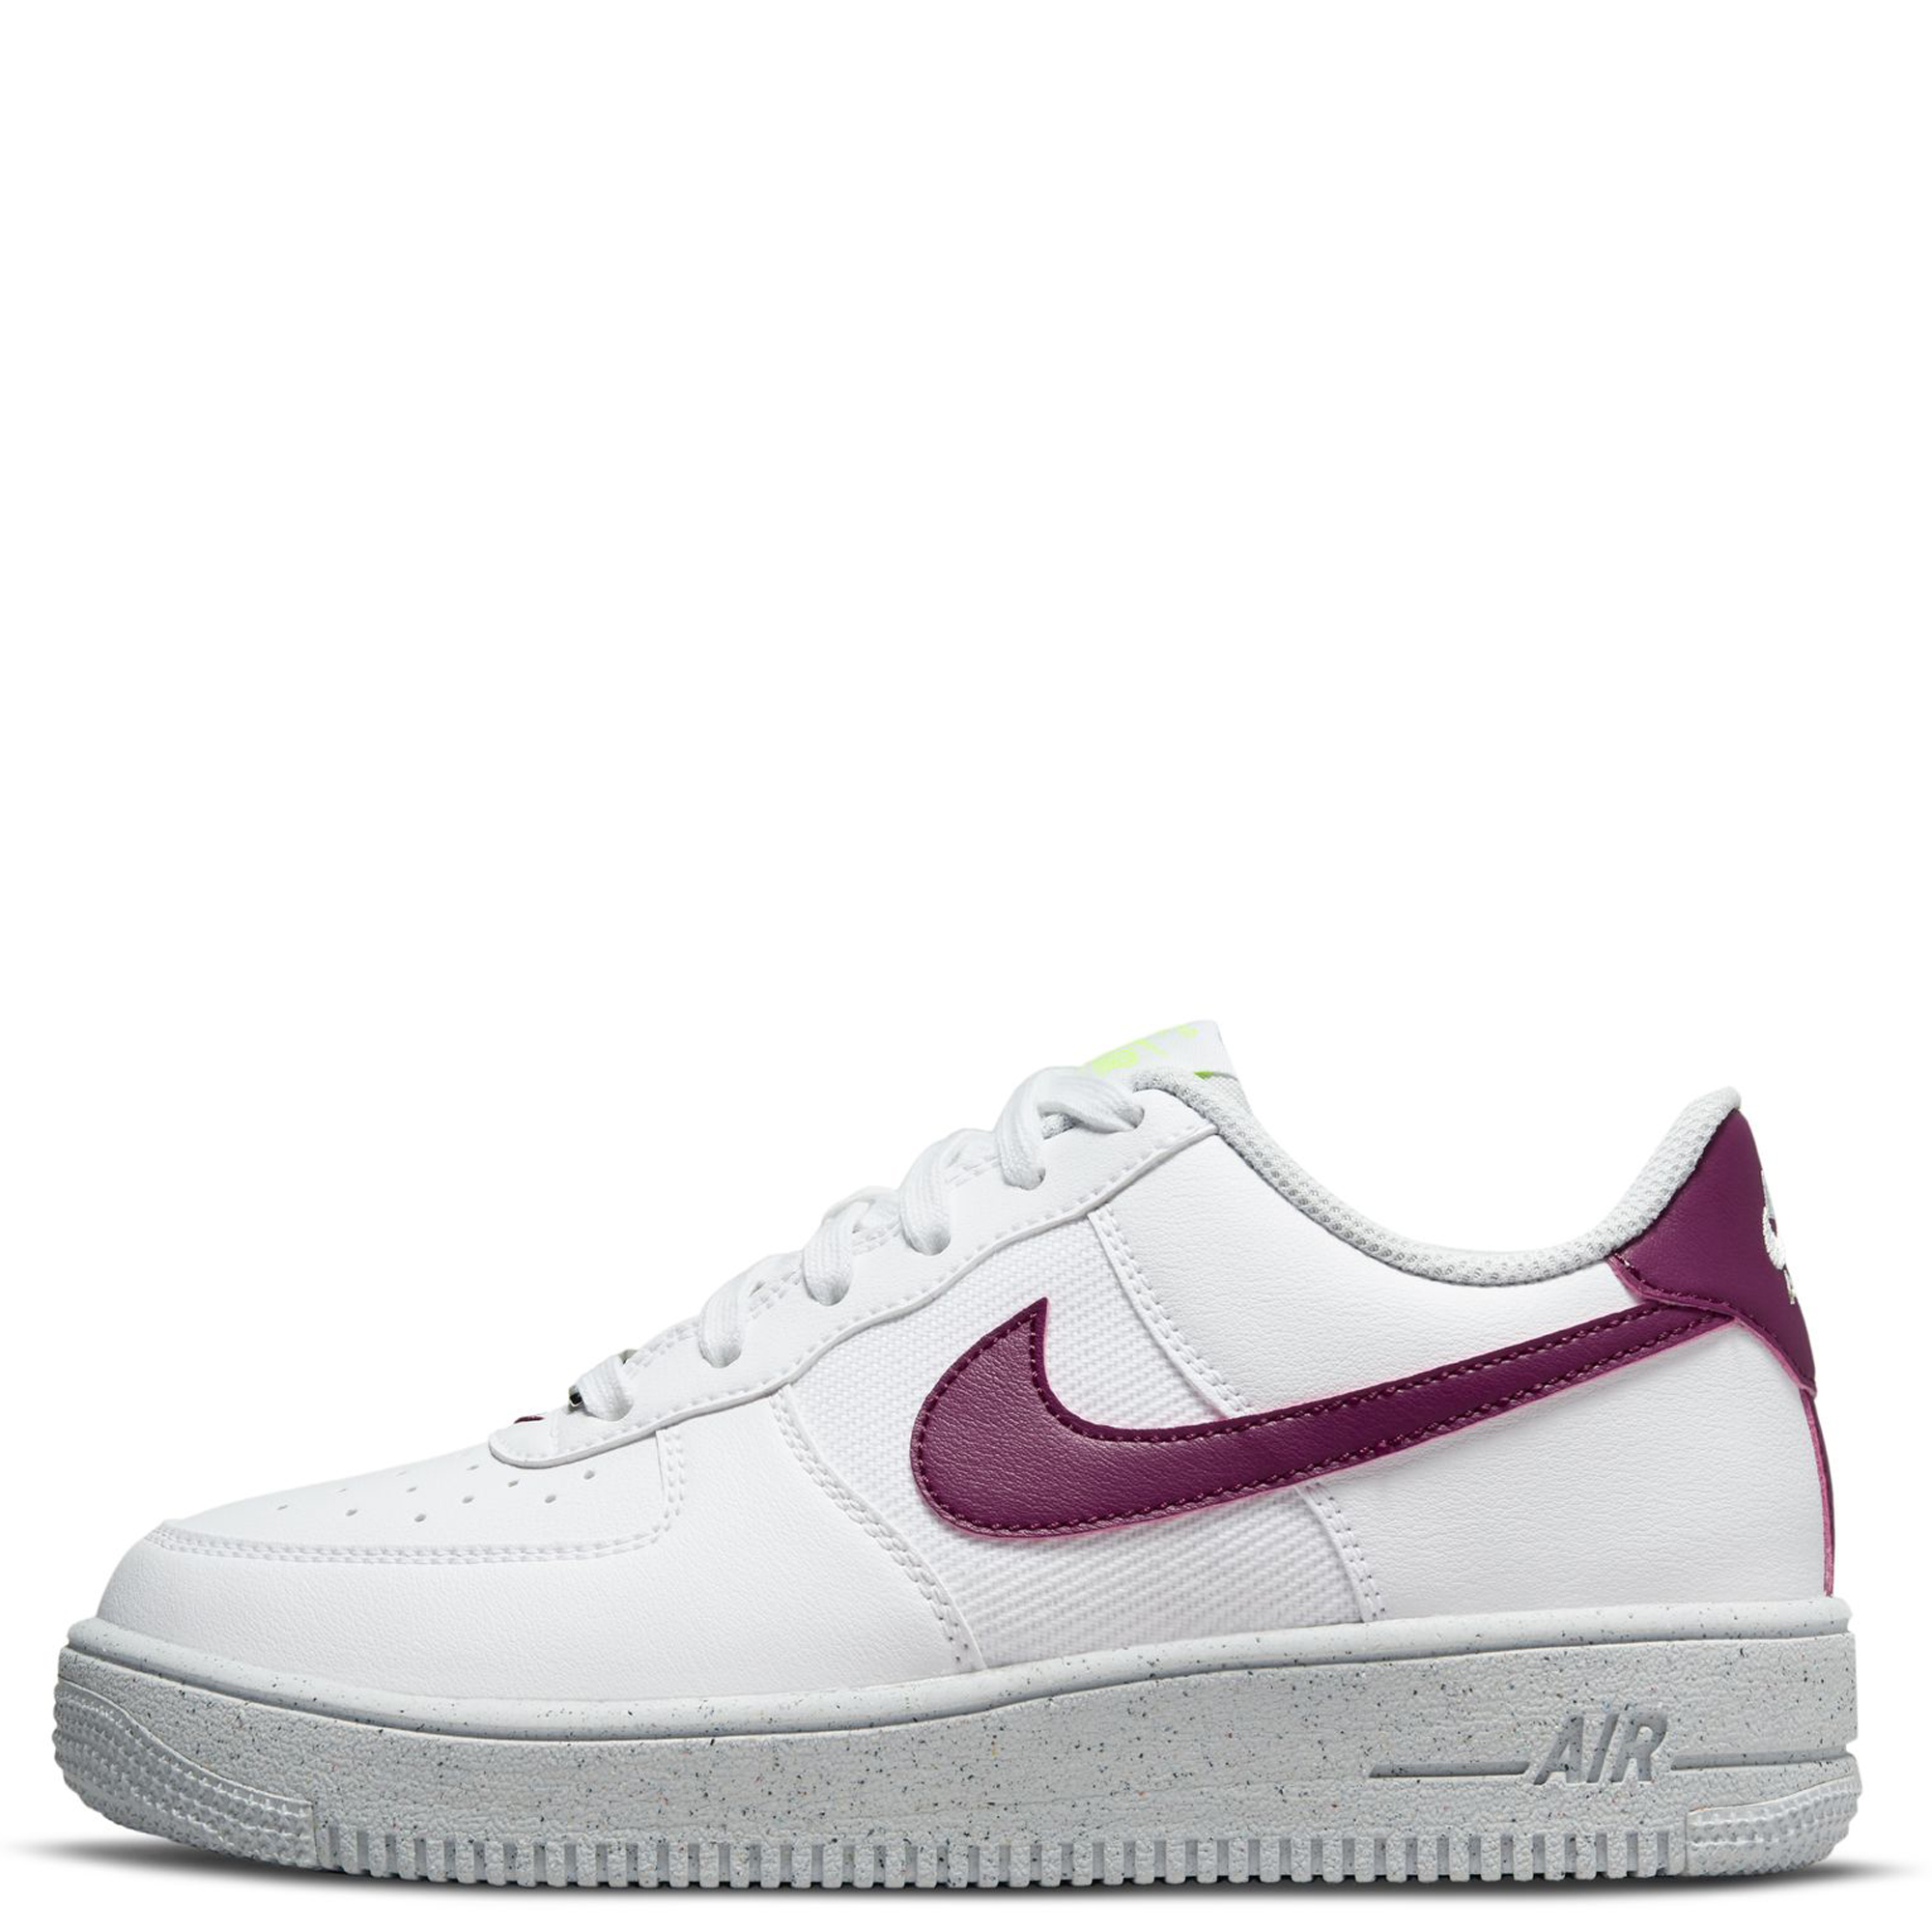 Nike Air Force 1 Crater White Orange Trance 5.5Y